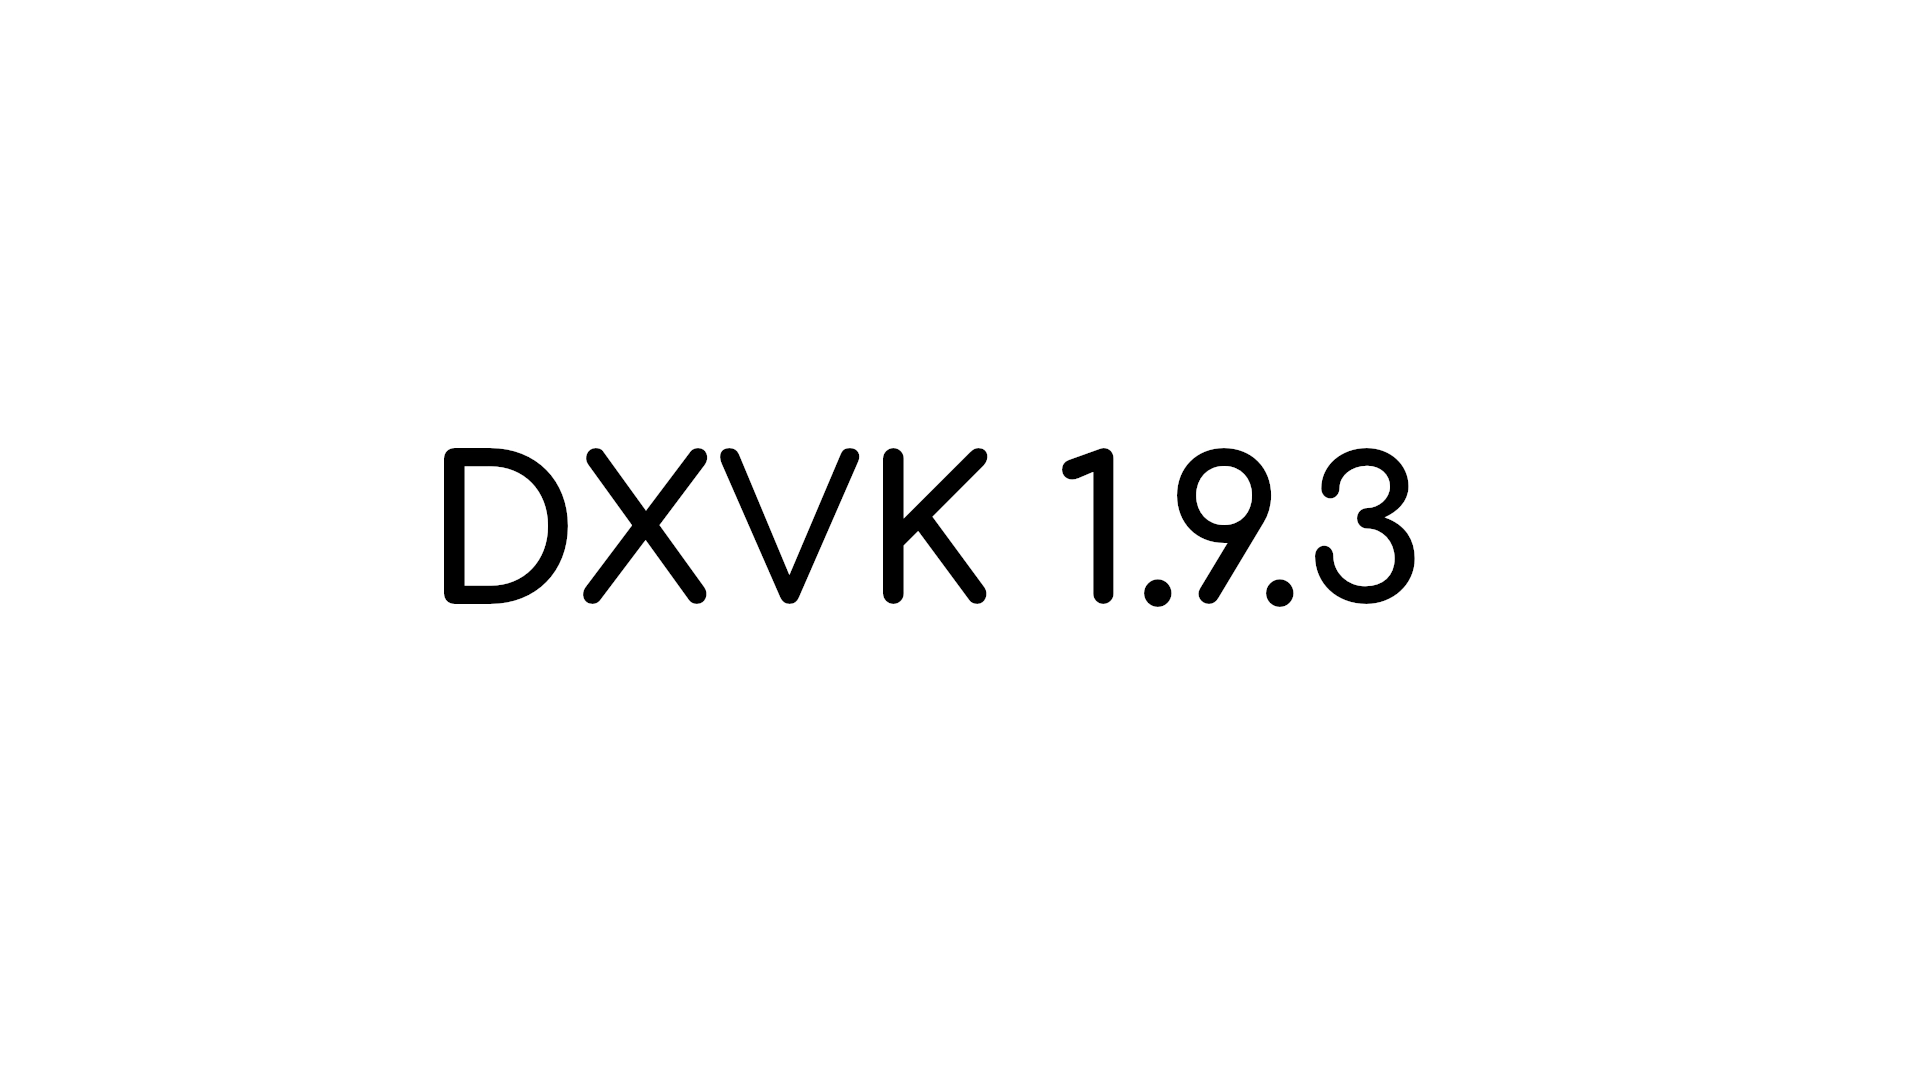 DXVK 1.9.3 Released with Improvements for Black Mesa, Crysis 3, and Many Other Games